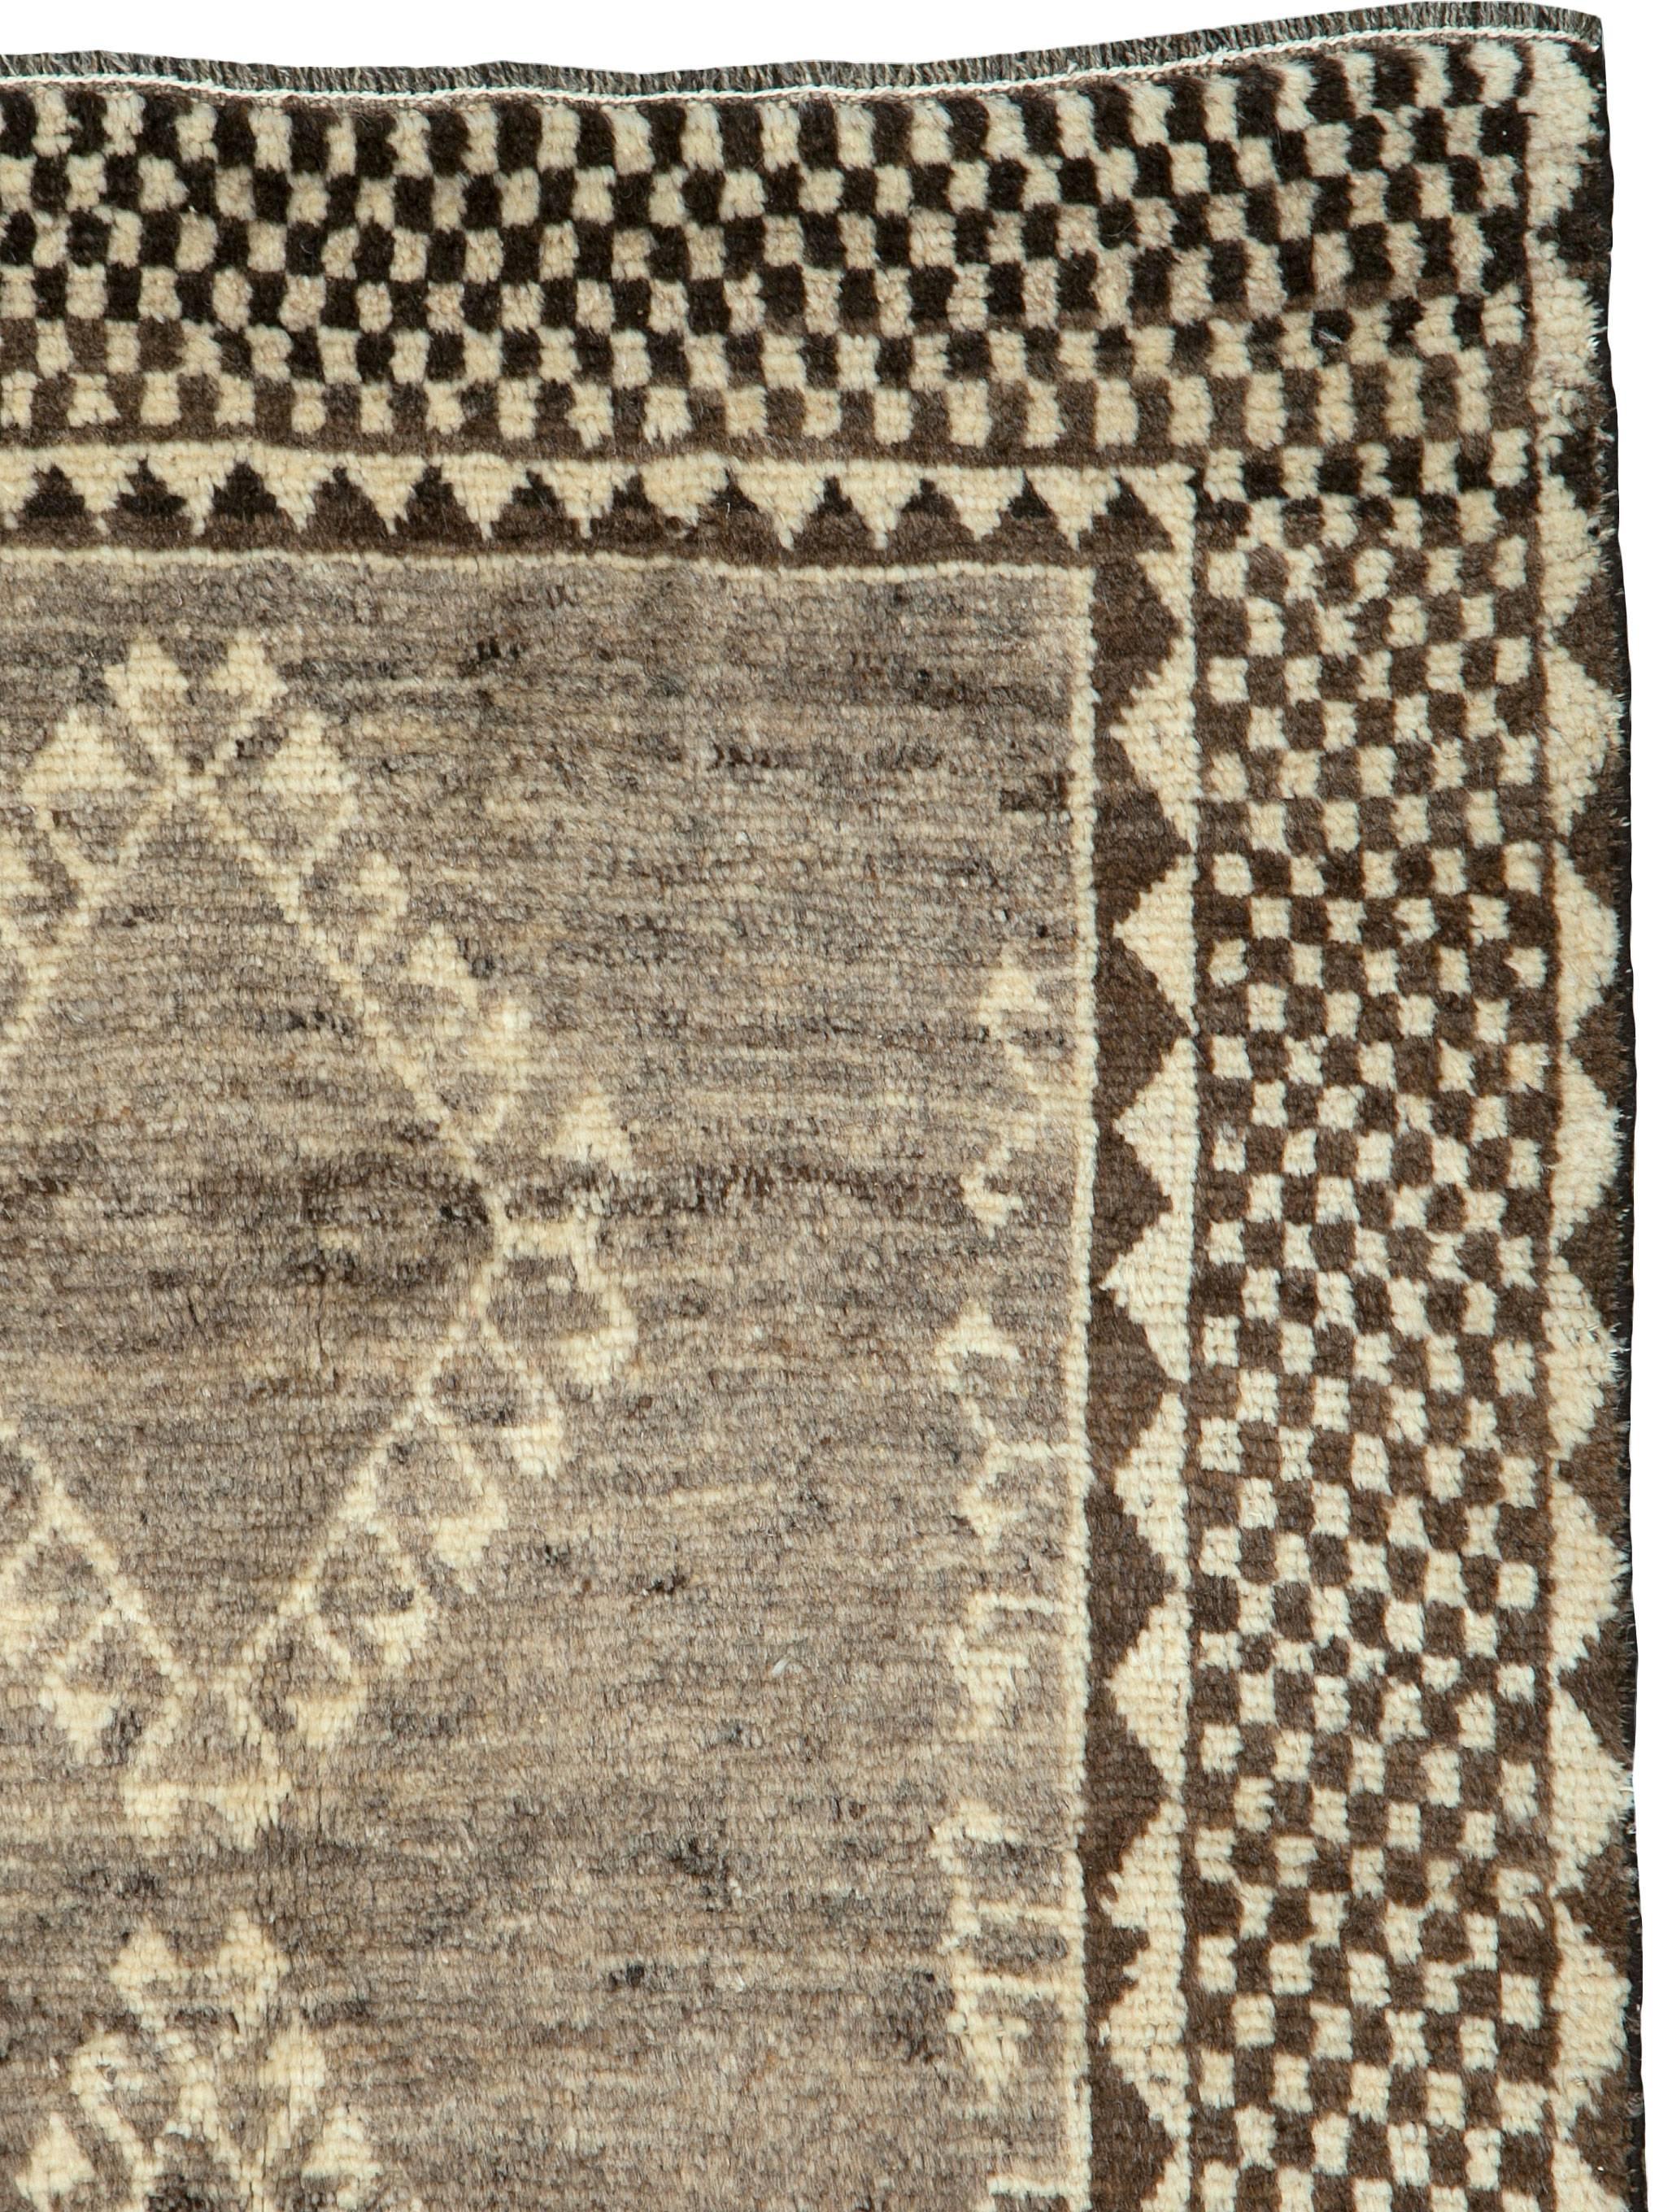 A vintage Persian Gabbeh carpet from the second quarter of the 20th century.